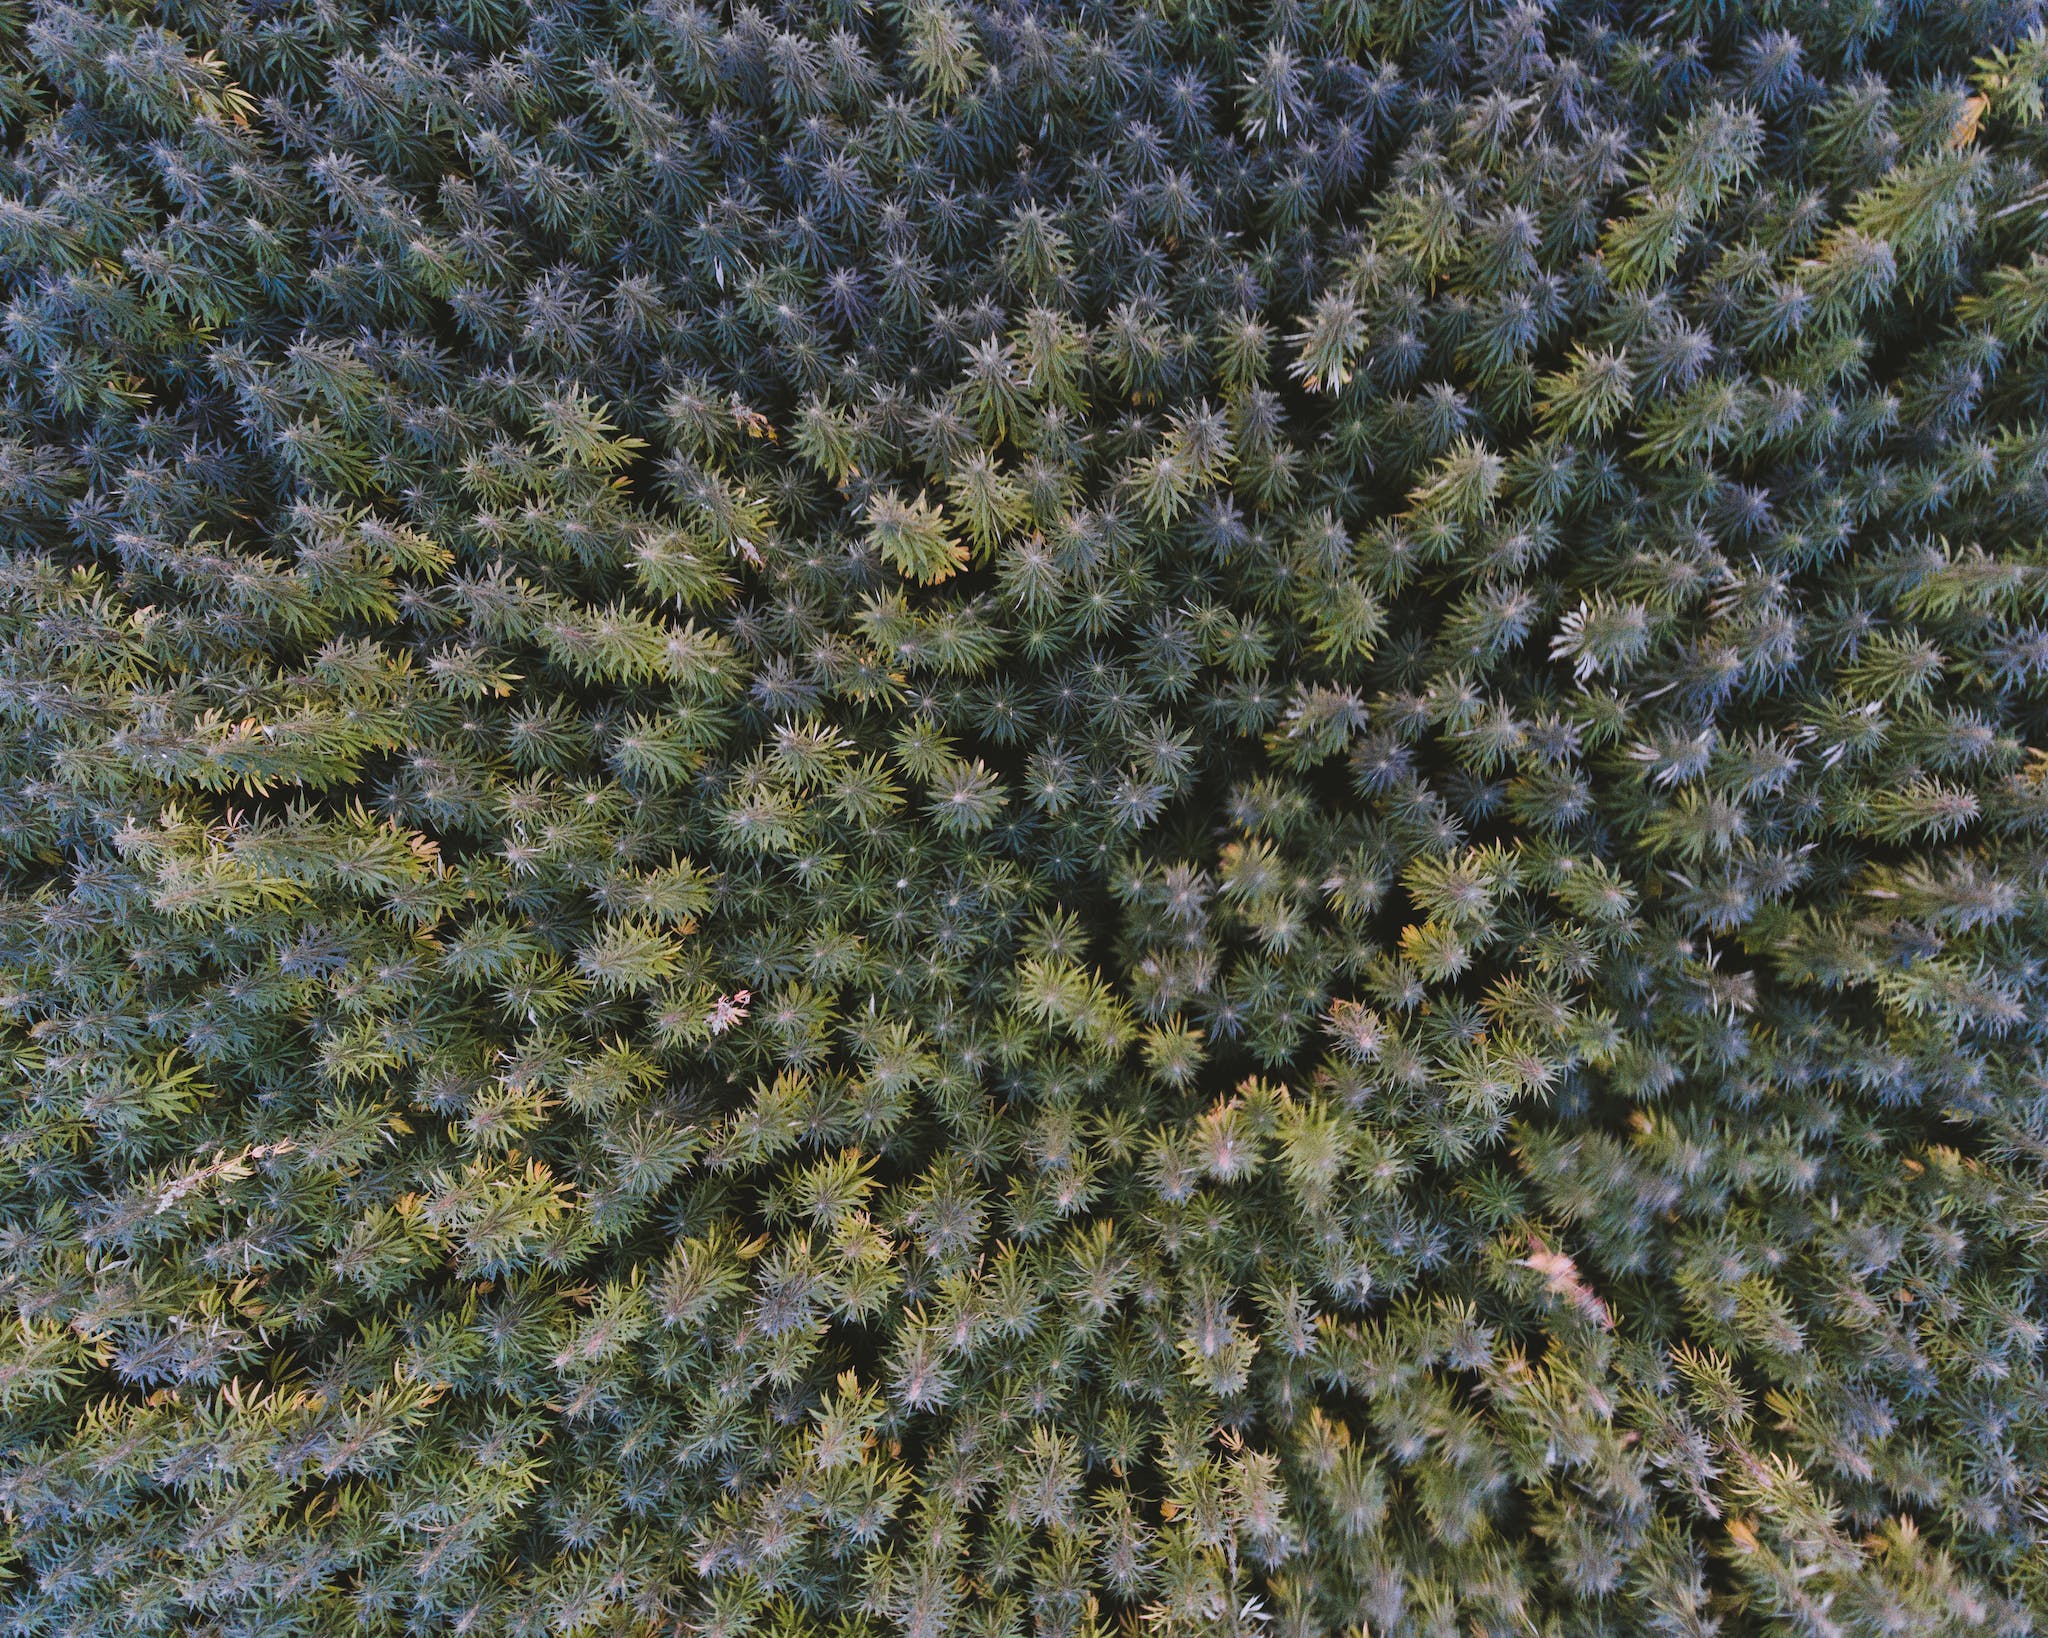 Aerial View of Green Plants